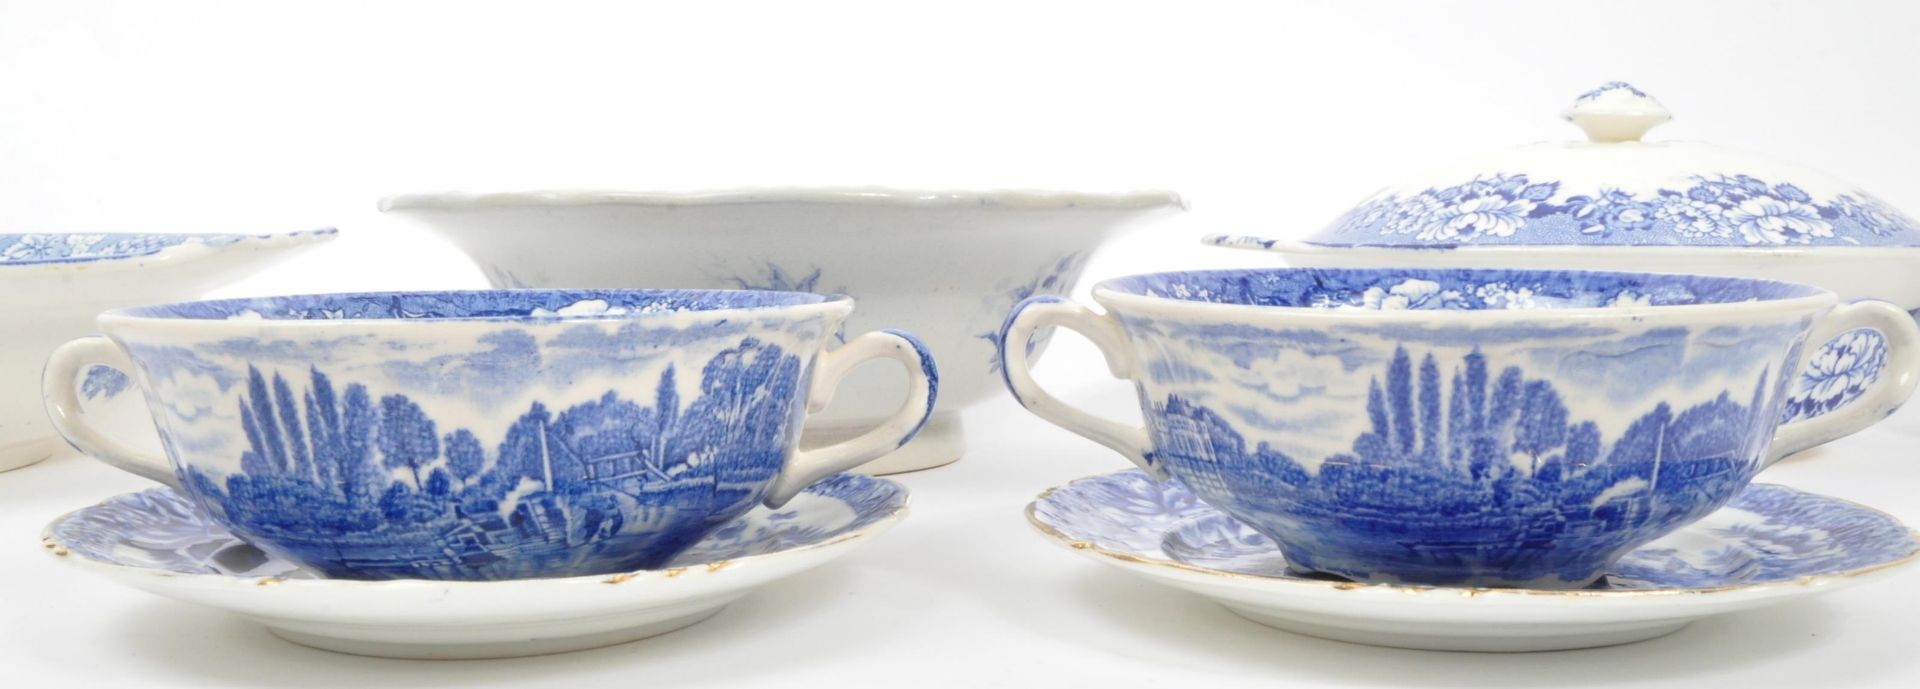 COLLECTION OF 19TH CENTURY BLUE & WHITE CHINA - Image 5 of 9